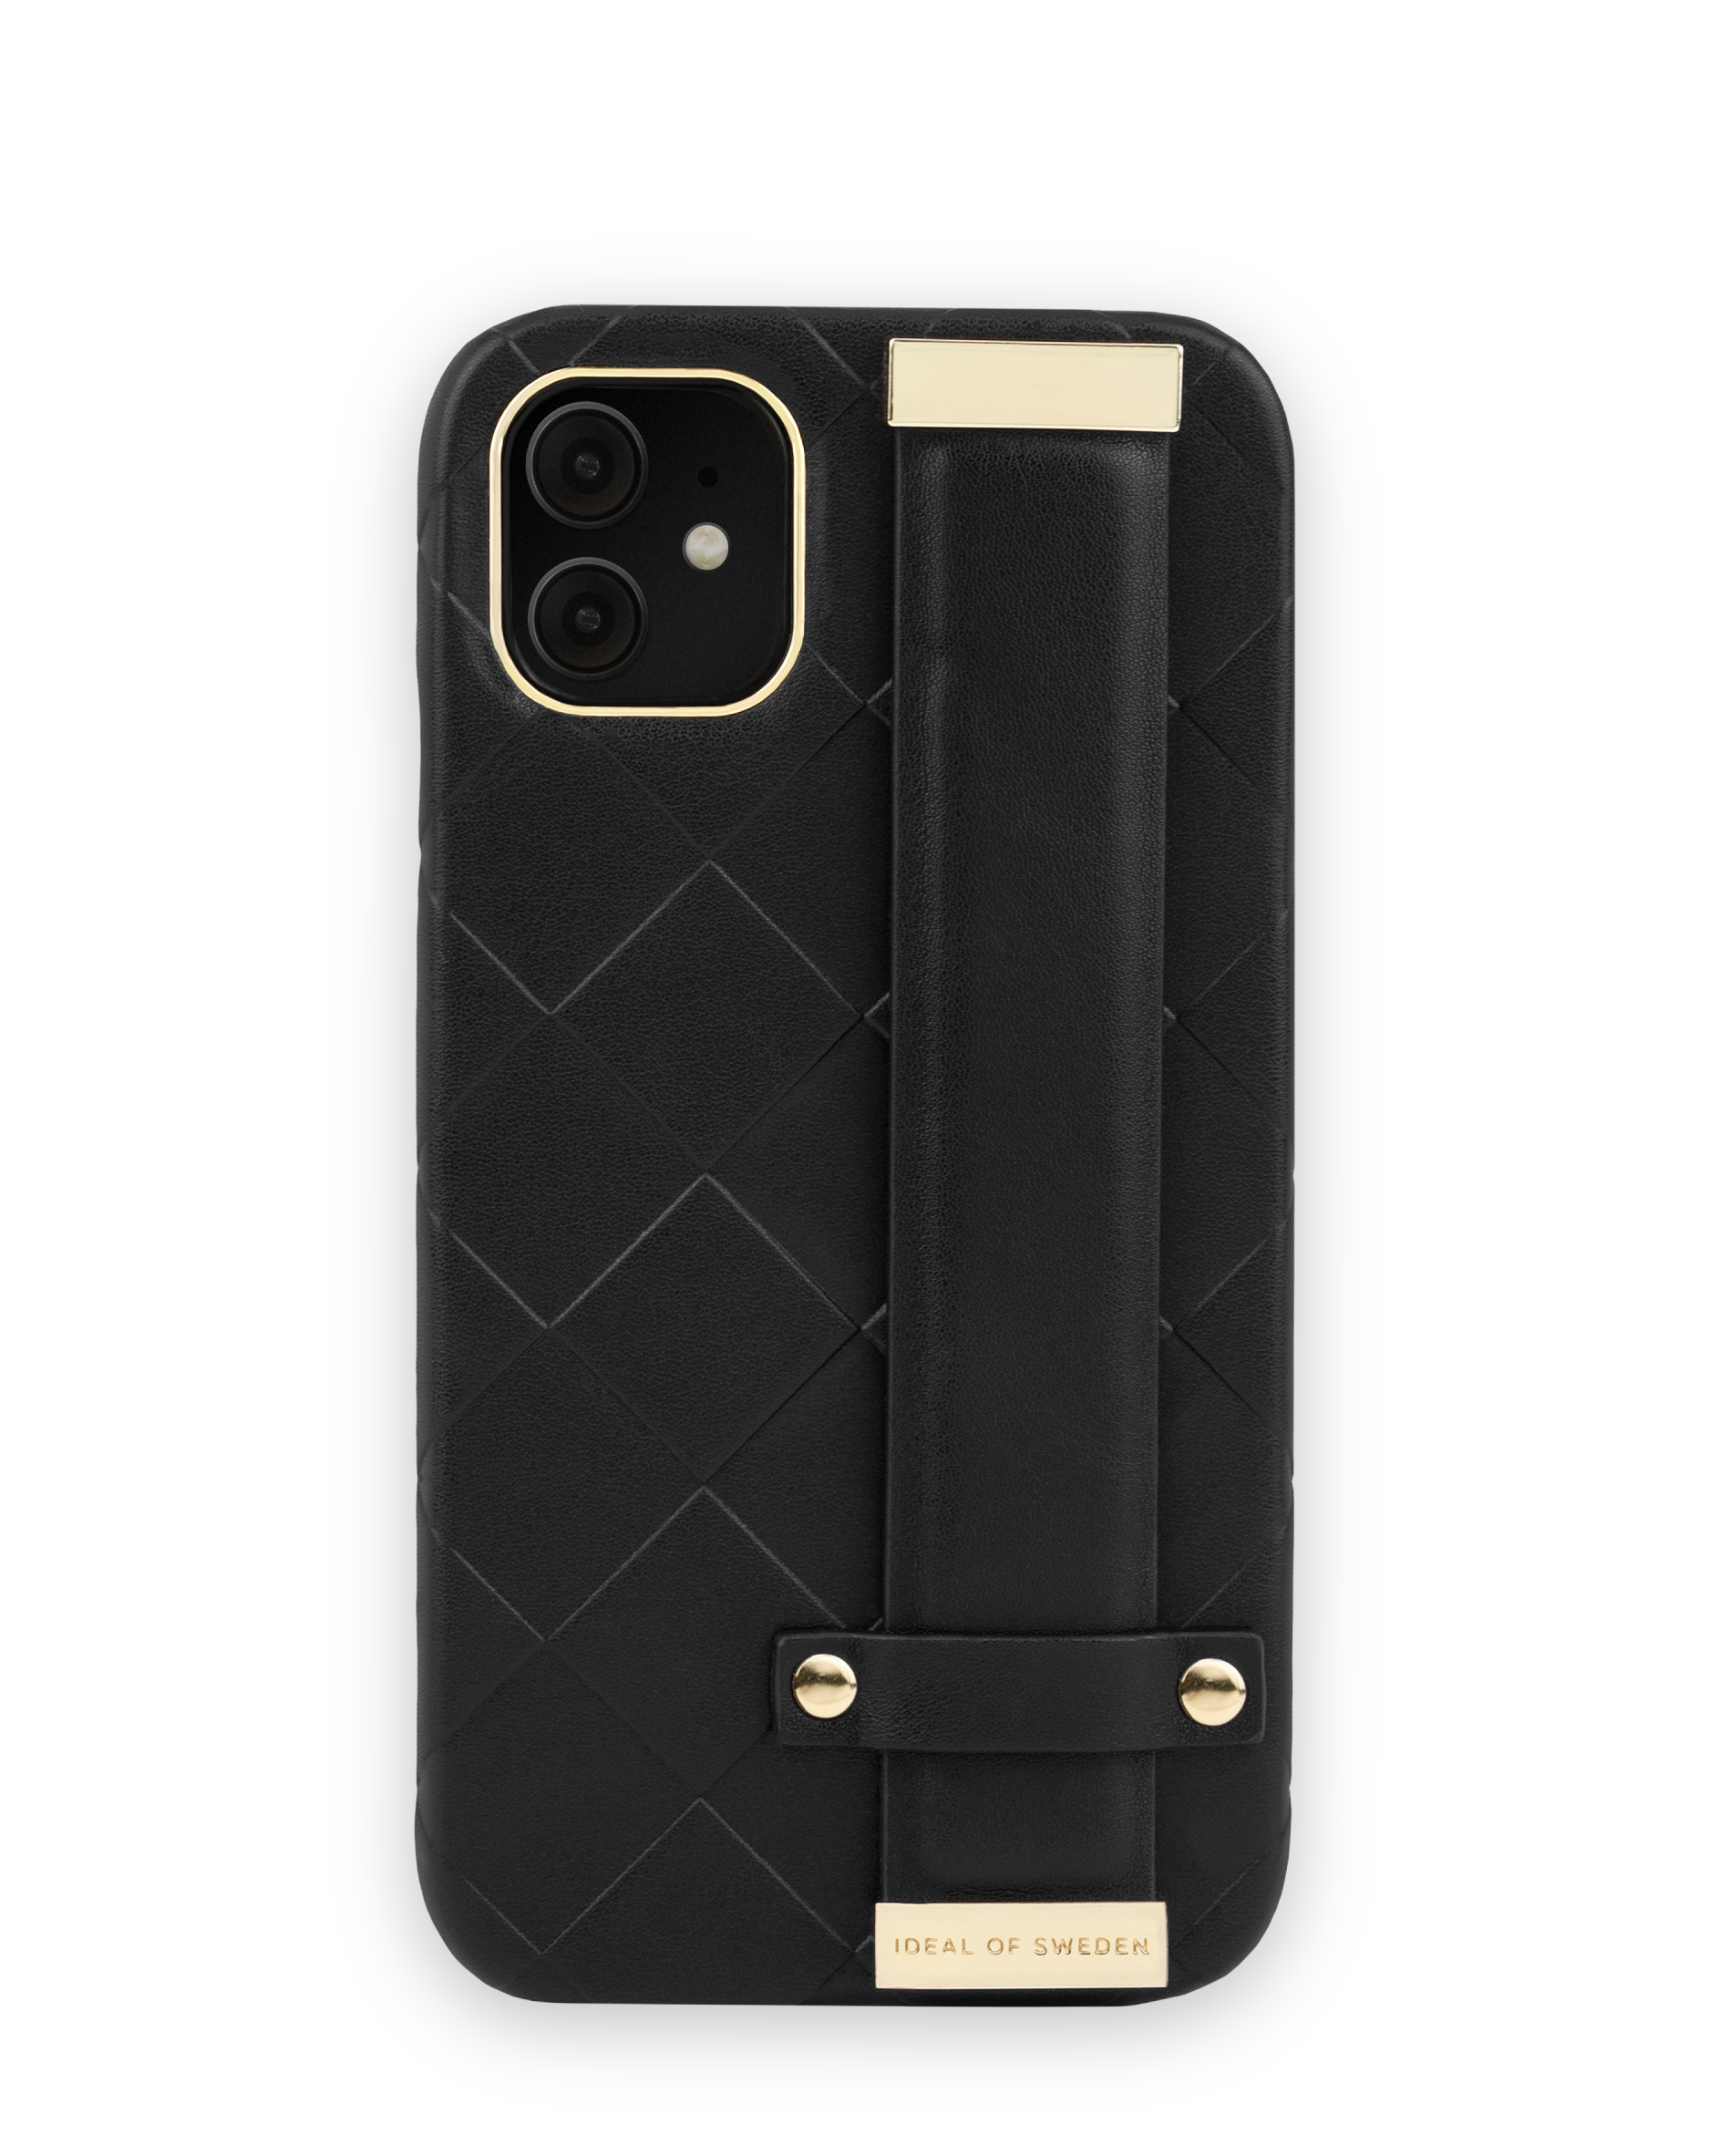 IDEAL Apple iPhone 11, Apple Noir OF SWEDEN iPhone Backcover, XR, Apple, IDSCSS21-I1961-289, Smooth